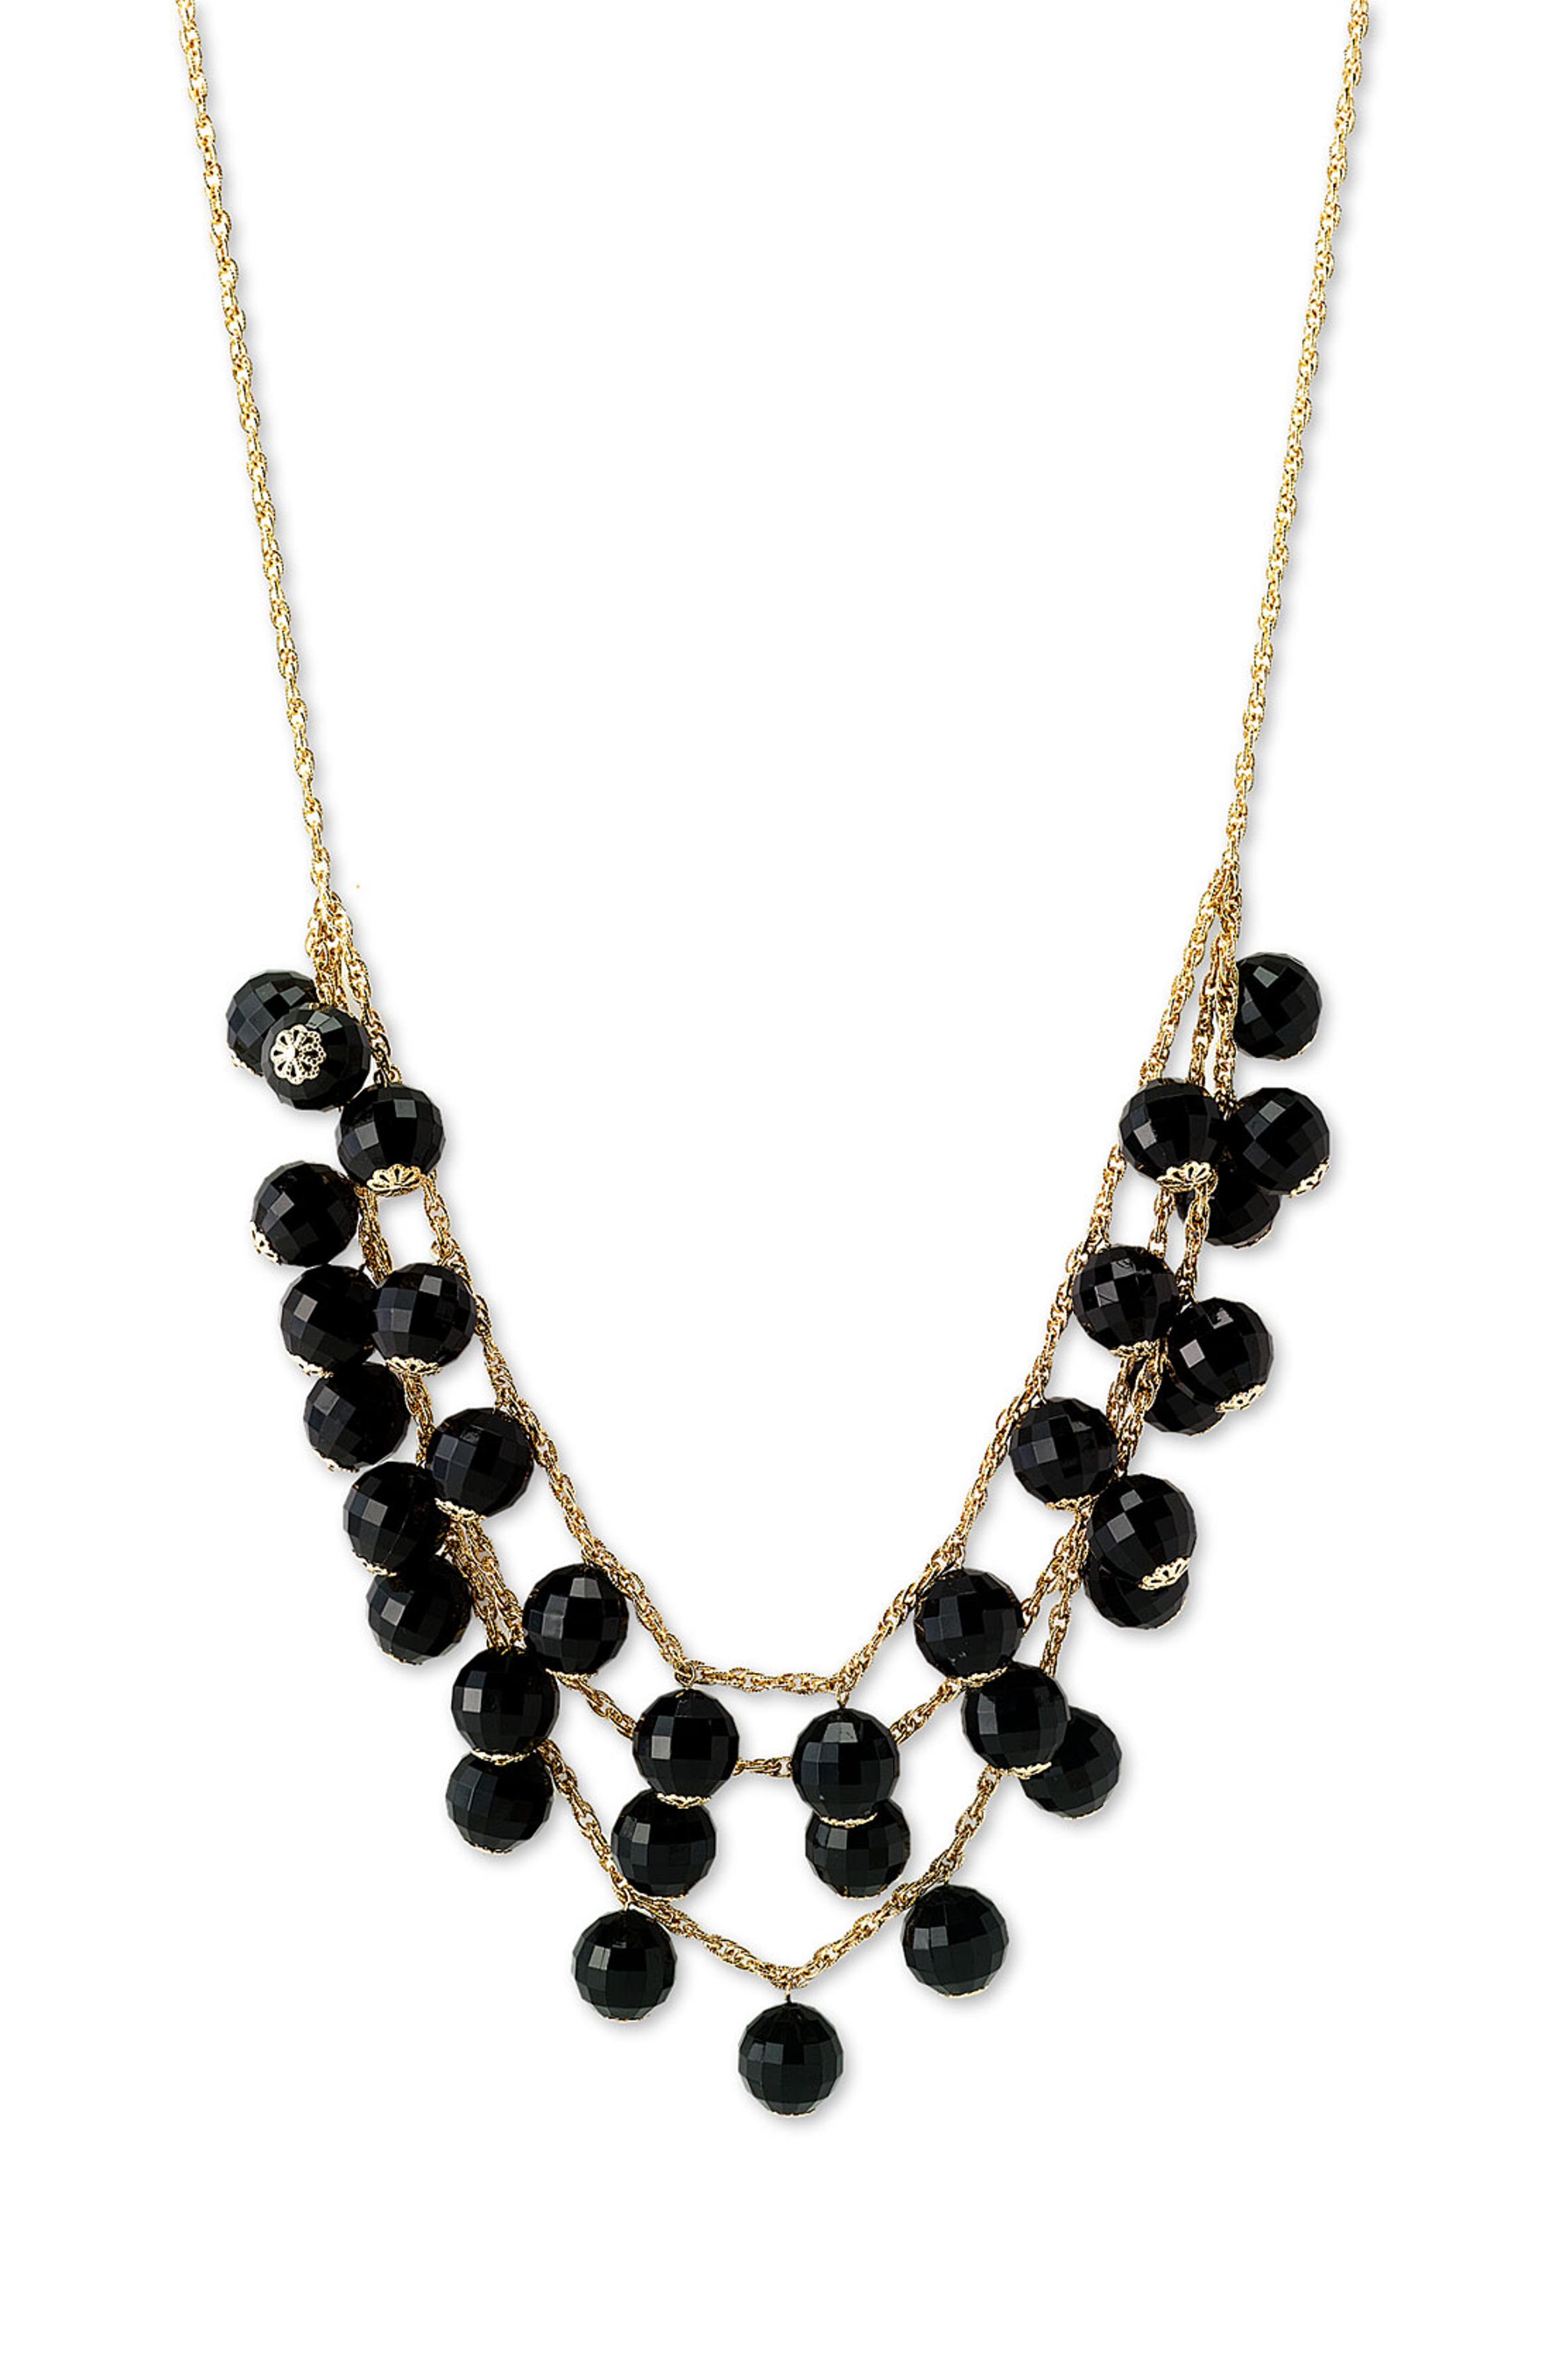 kate spade 'gumdrops' long triple layer necklace | Nordstrom